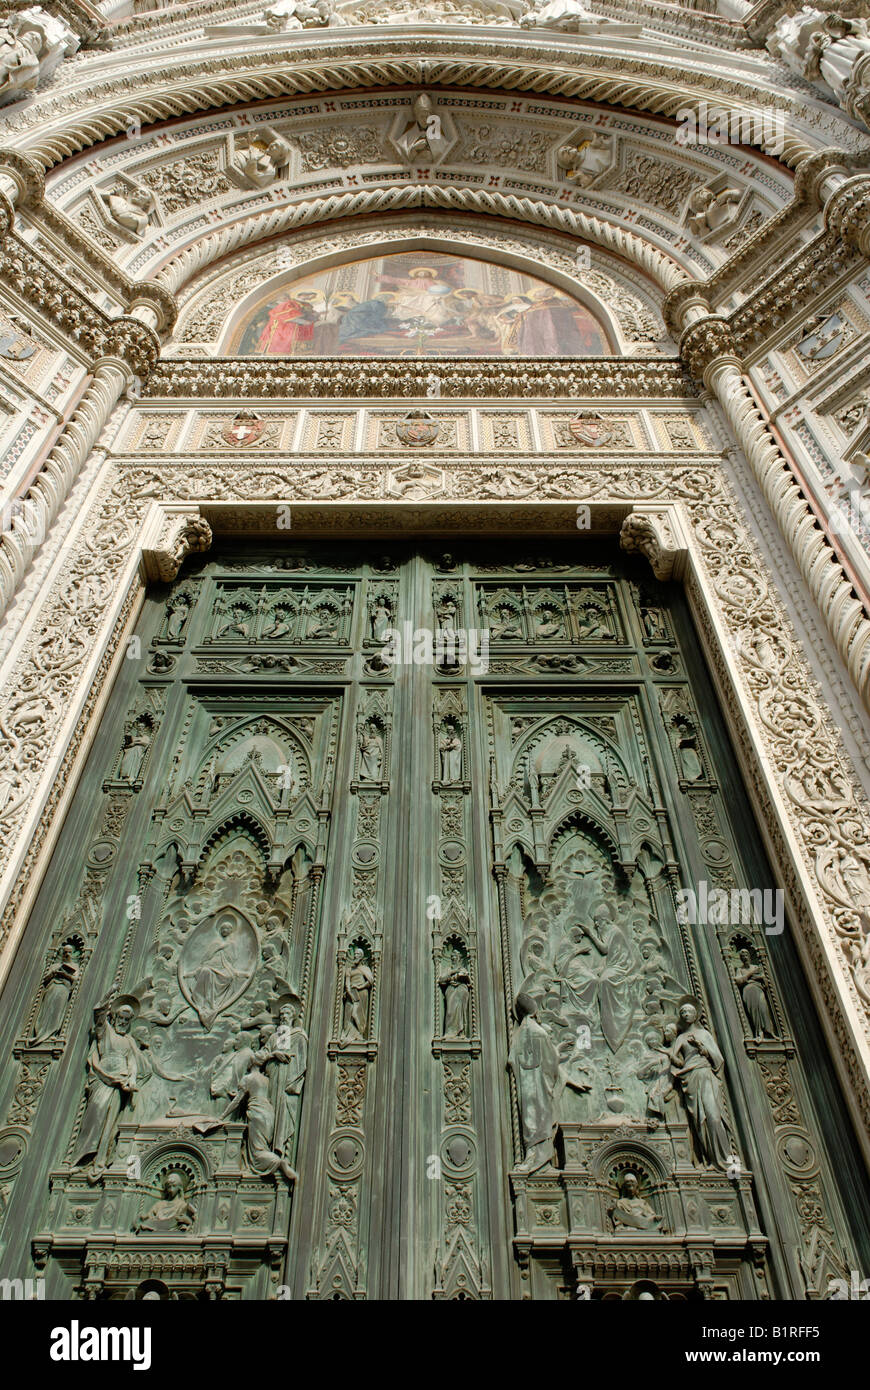 Bronze door of main entrance to the Cathedral of Santa Maria del Fiore or Duomo di Firenze, Florence, UNESCO World Heritage Sit Stock Photo